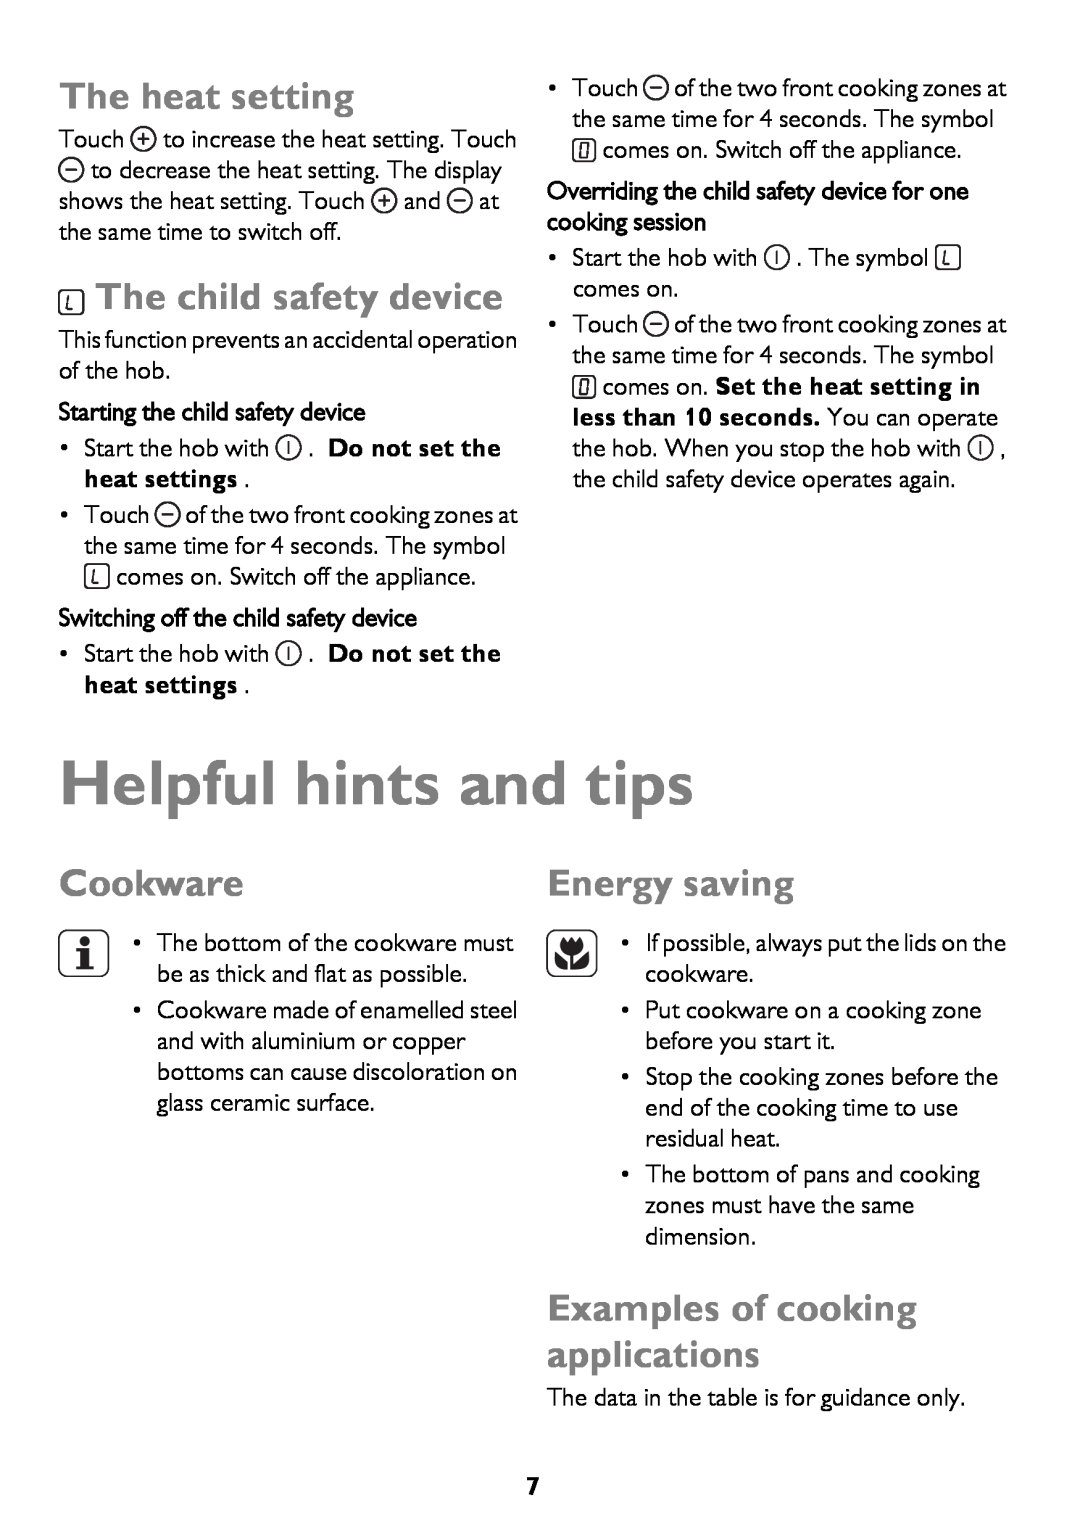 John Lewis JLBICH605 Helpful hints and tips, The heat setting, The child safety device, Cookware, Energy saving 